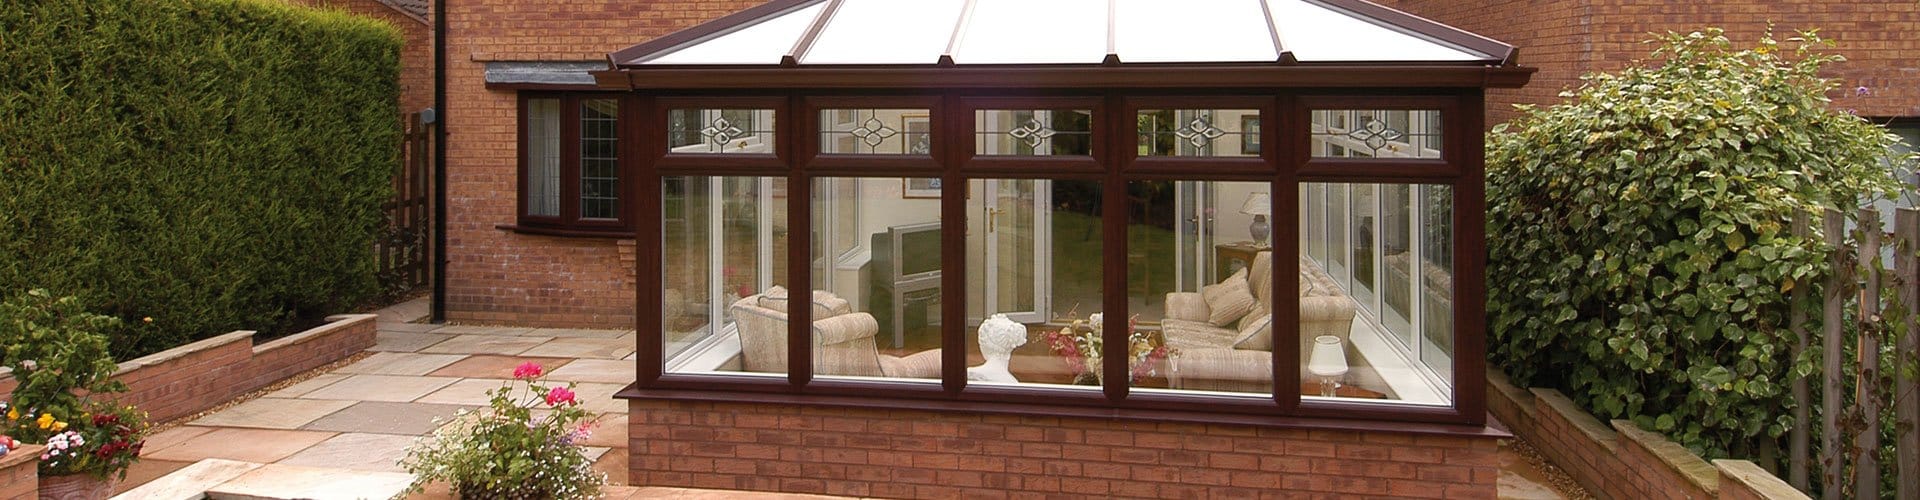 Period property conservatories in Basingstoke